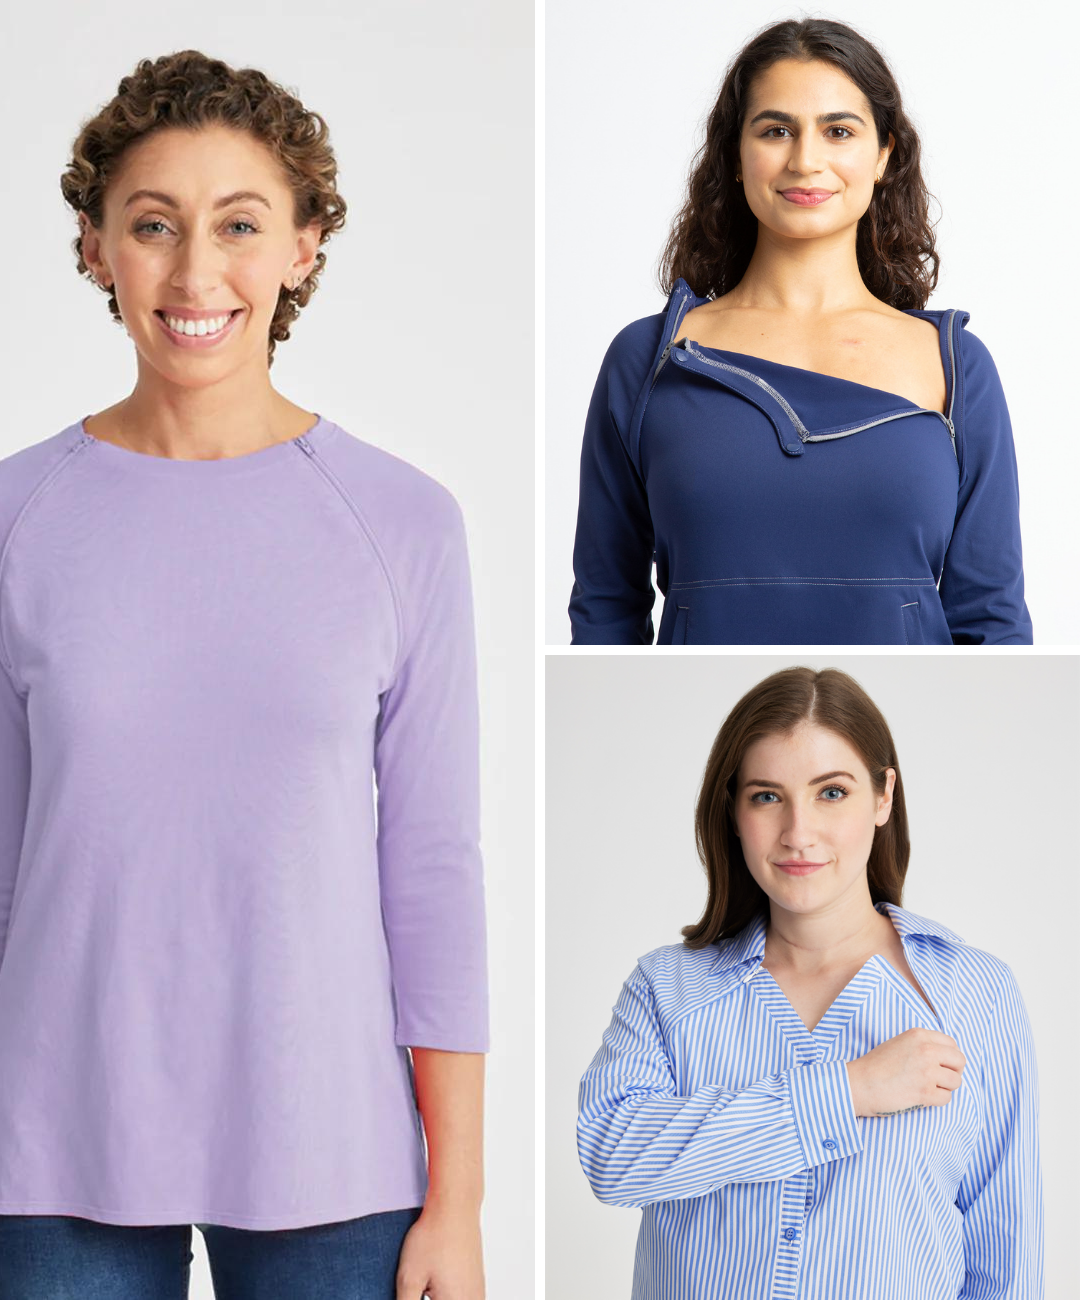 Womens Chest Port Access Support Bundle with Button Down